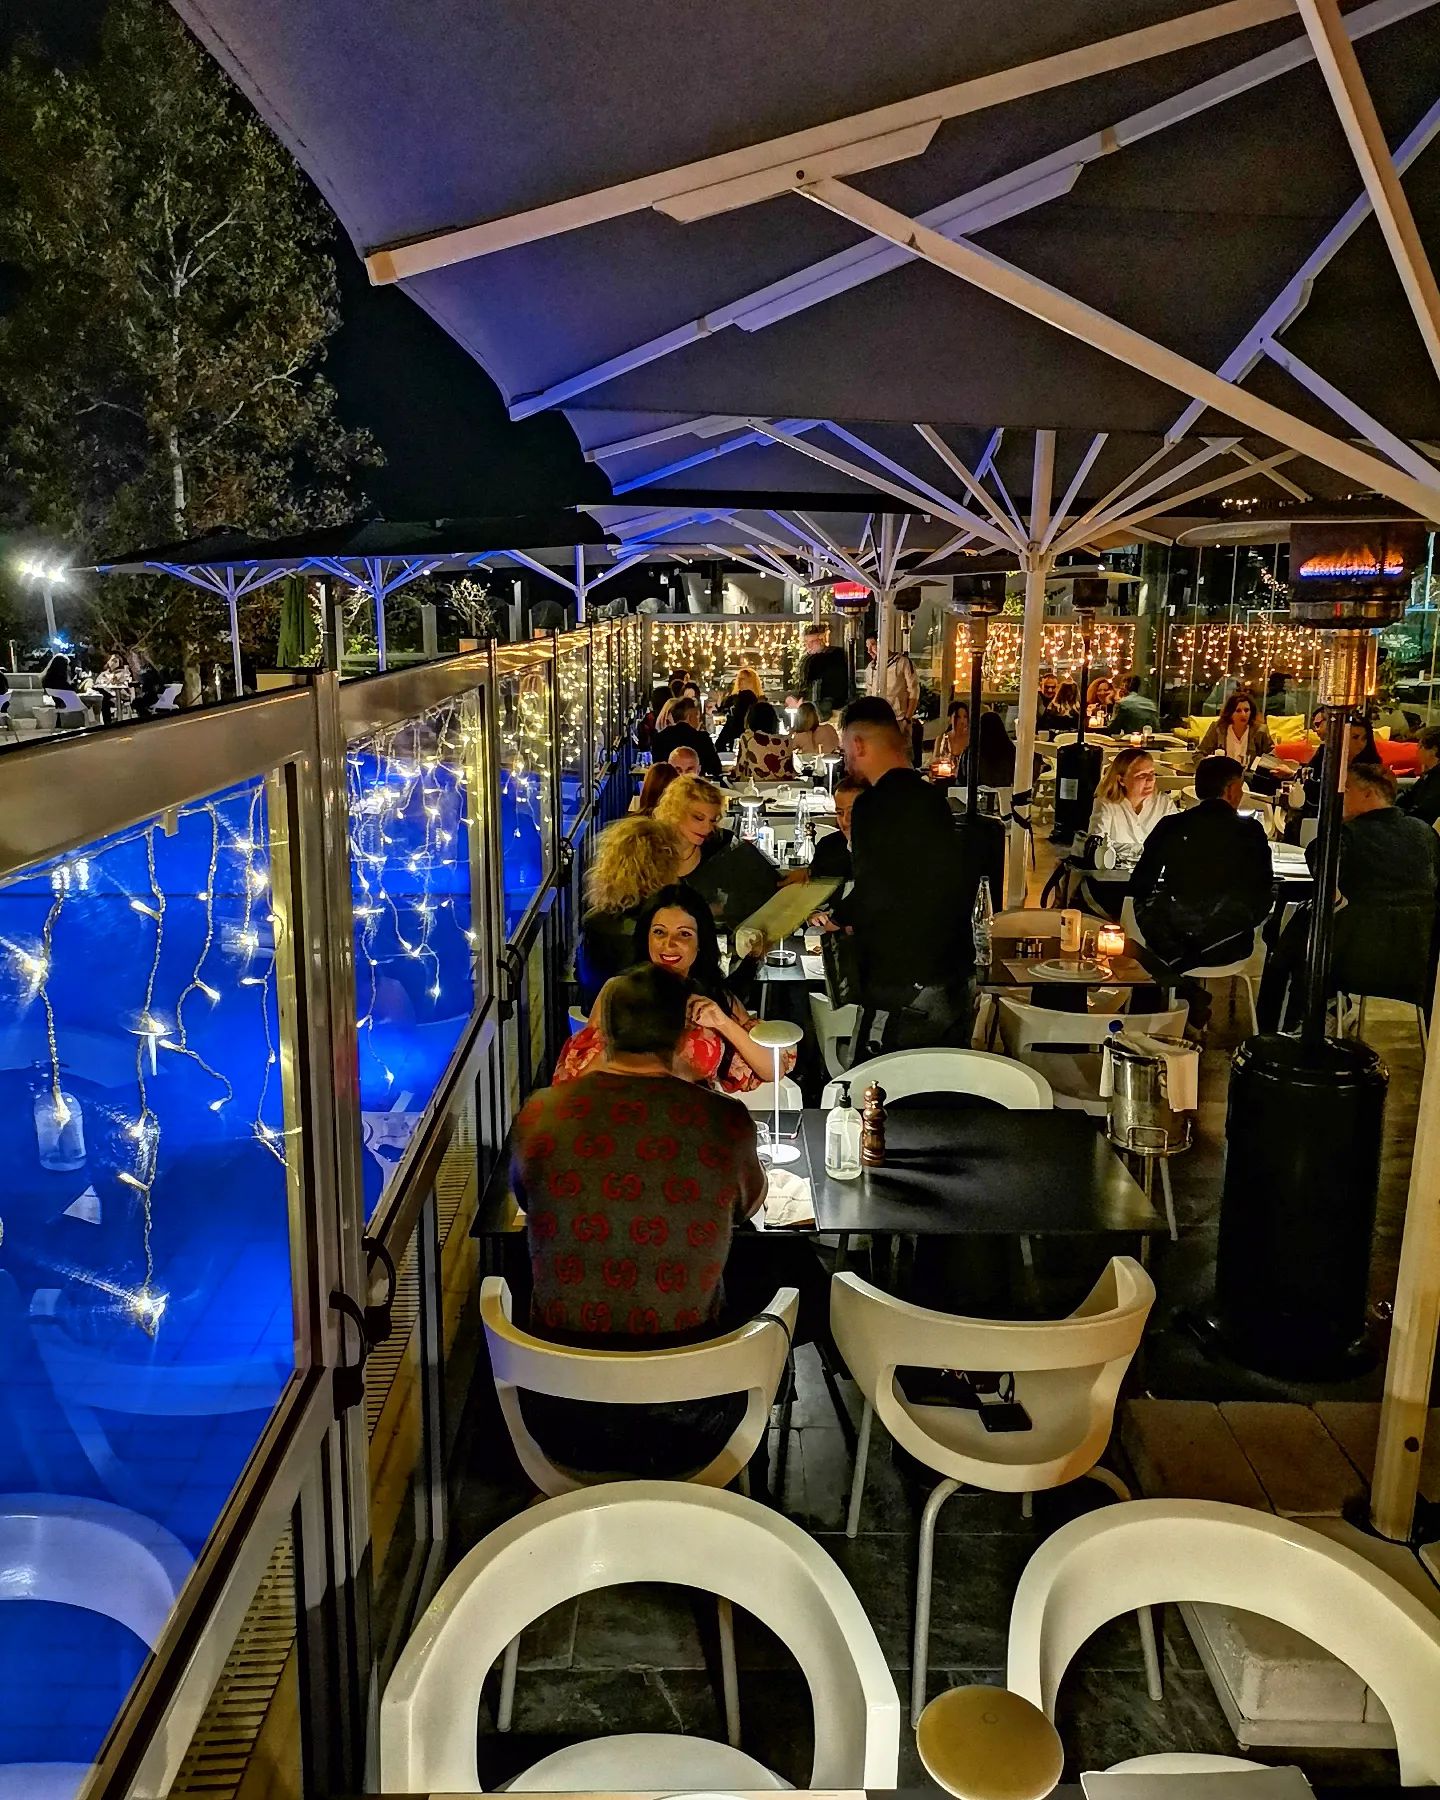 pisina winter outdoor restaurant beside the pool  marinazeas piraeus akti themistokleous 25 res.2104511324 #restaurant #food #foodie #foodporn #instafood #foodlover #dinner #bar #foodphotography #delicious #yummy #foodstagram #lunch #instagood #chef #foodblogger #cafe #love #hotel #foodies #tasty #pizza #wine #eat #delivery #restaurante #travel #foodgasm #cocktails #healthyfood